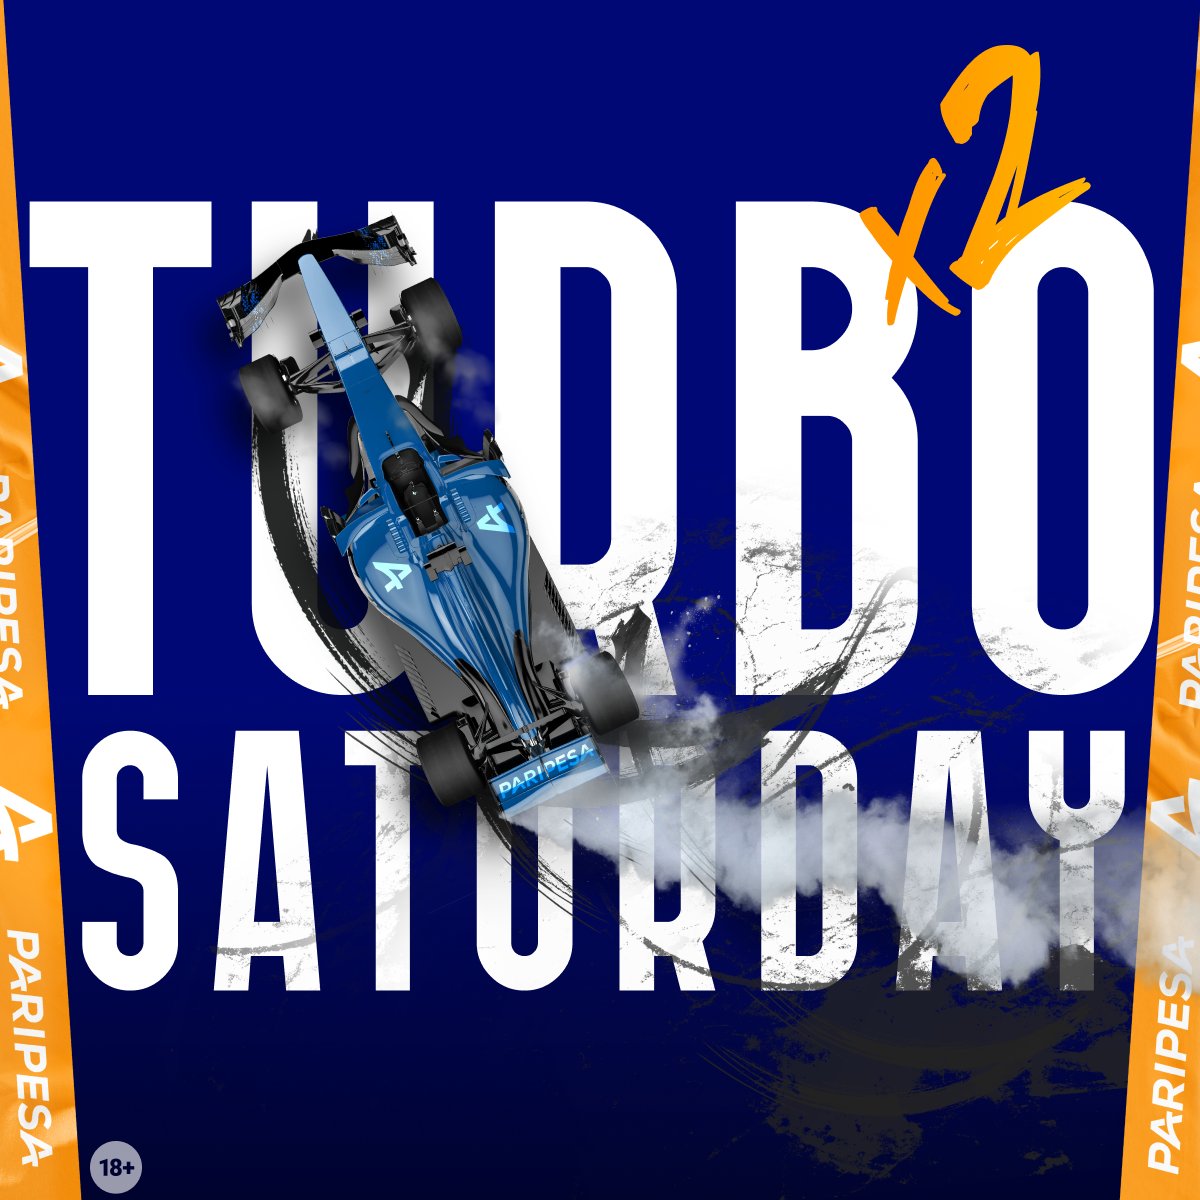 😀 We are sure that you can’t imagine Saturday without PARIPESA TURBO SATURDAY!
🤑 Top up your account every Saturday and get a 100% deposit bonus

💙Read all the rules on PariPesa!
👉 m.paripesa.bet/irw5

#paripesa #turbosaturday